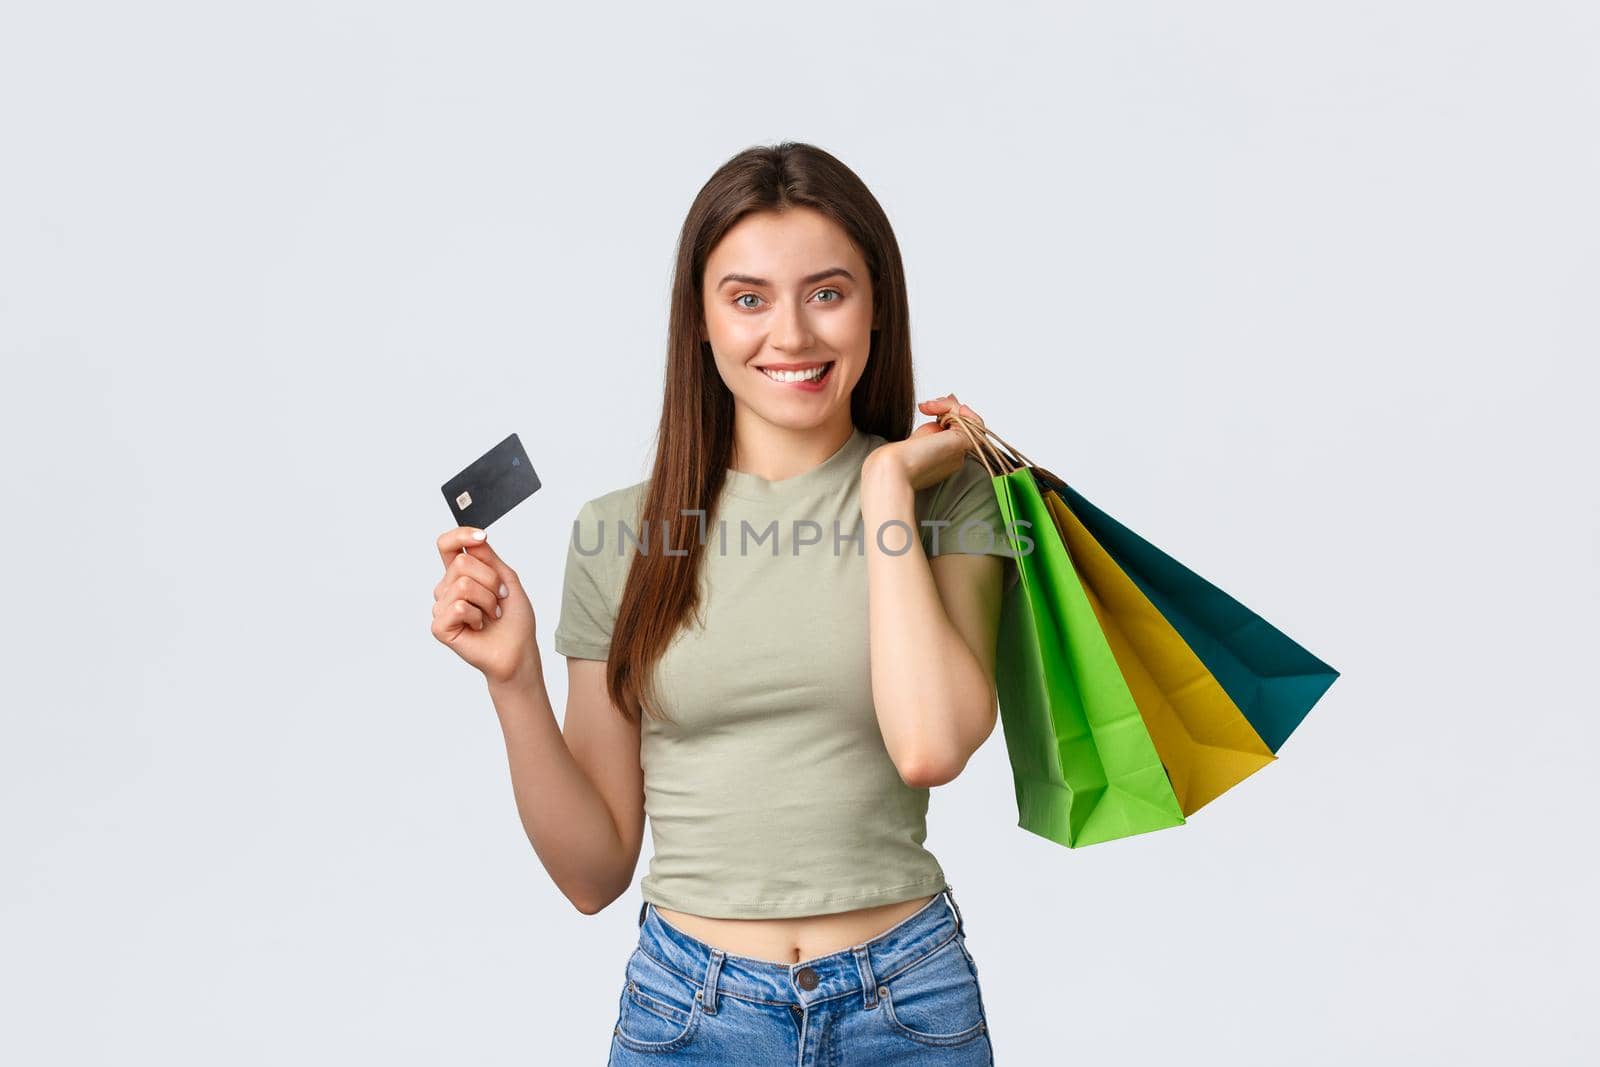 Shopping mall, lifestyle and fashion concept. Excited smiling young woman biting lip, tempt to waste all money on credit card, holding bags with clothes and looking pleased, white background.